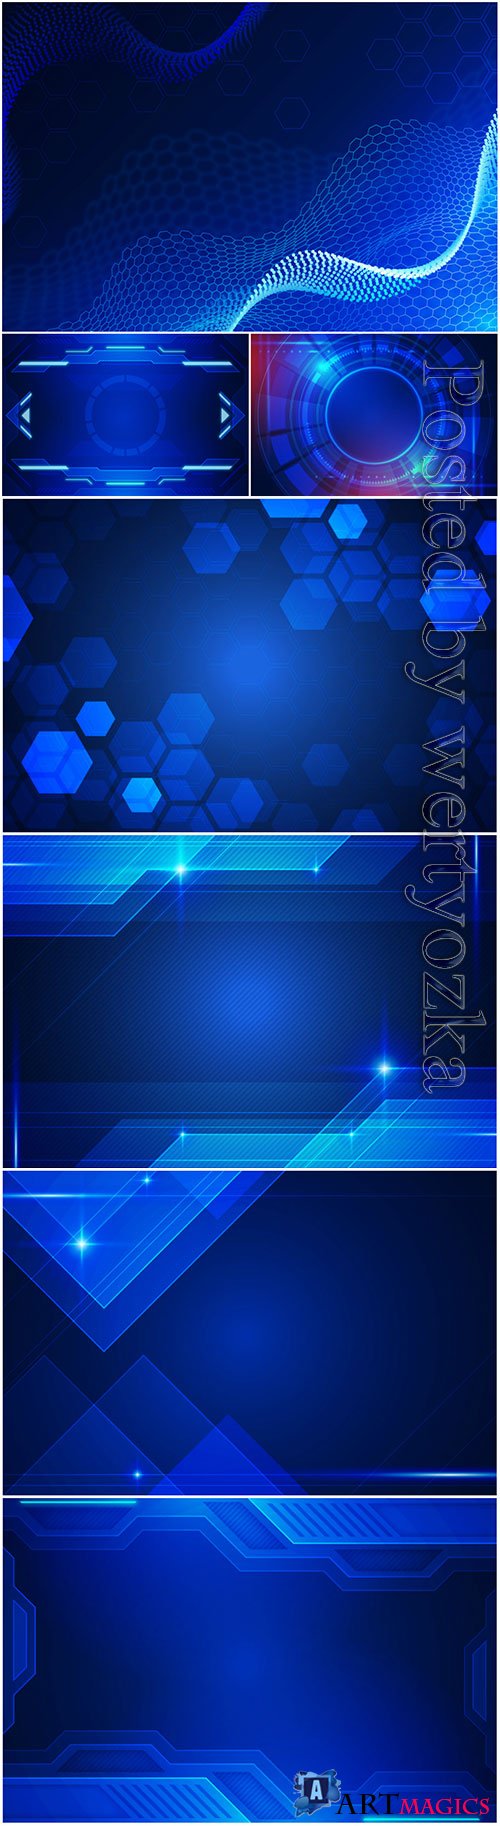 Modernistic tech vector background